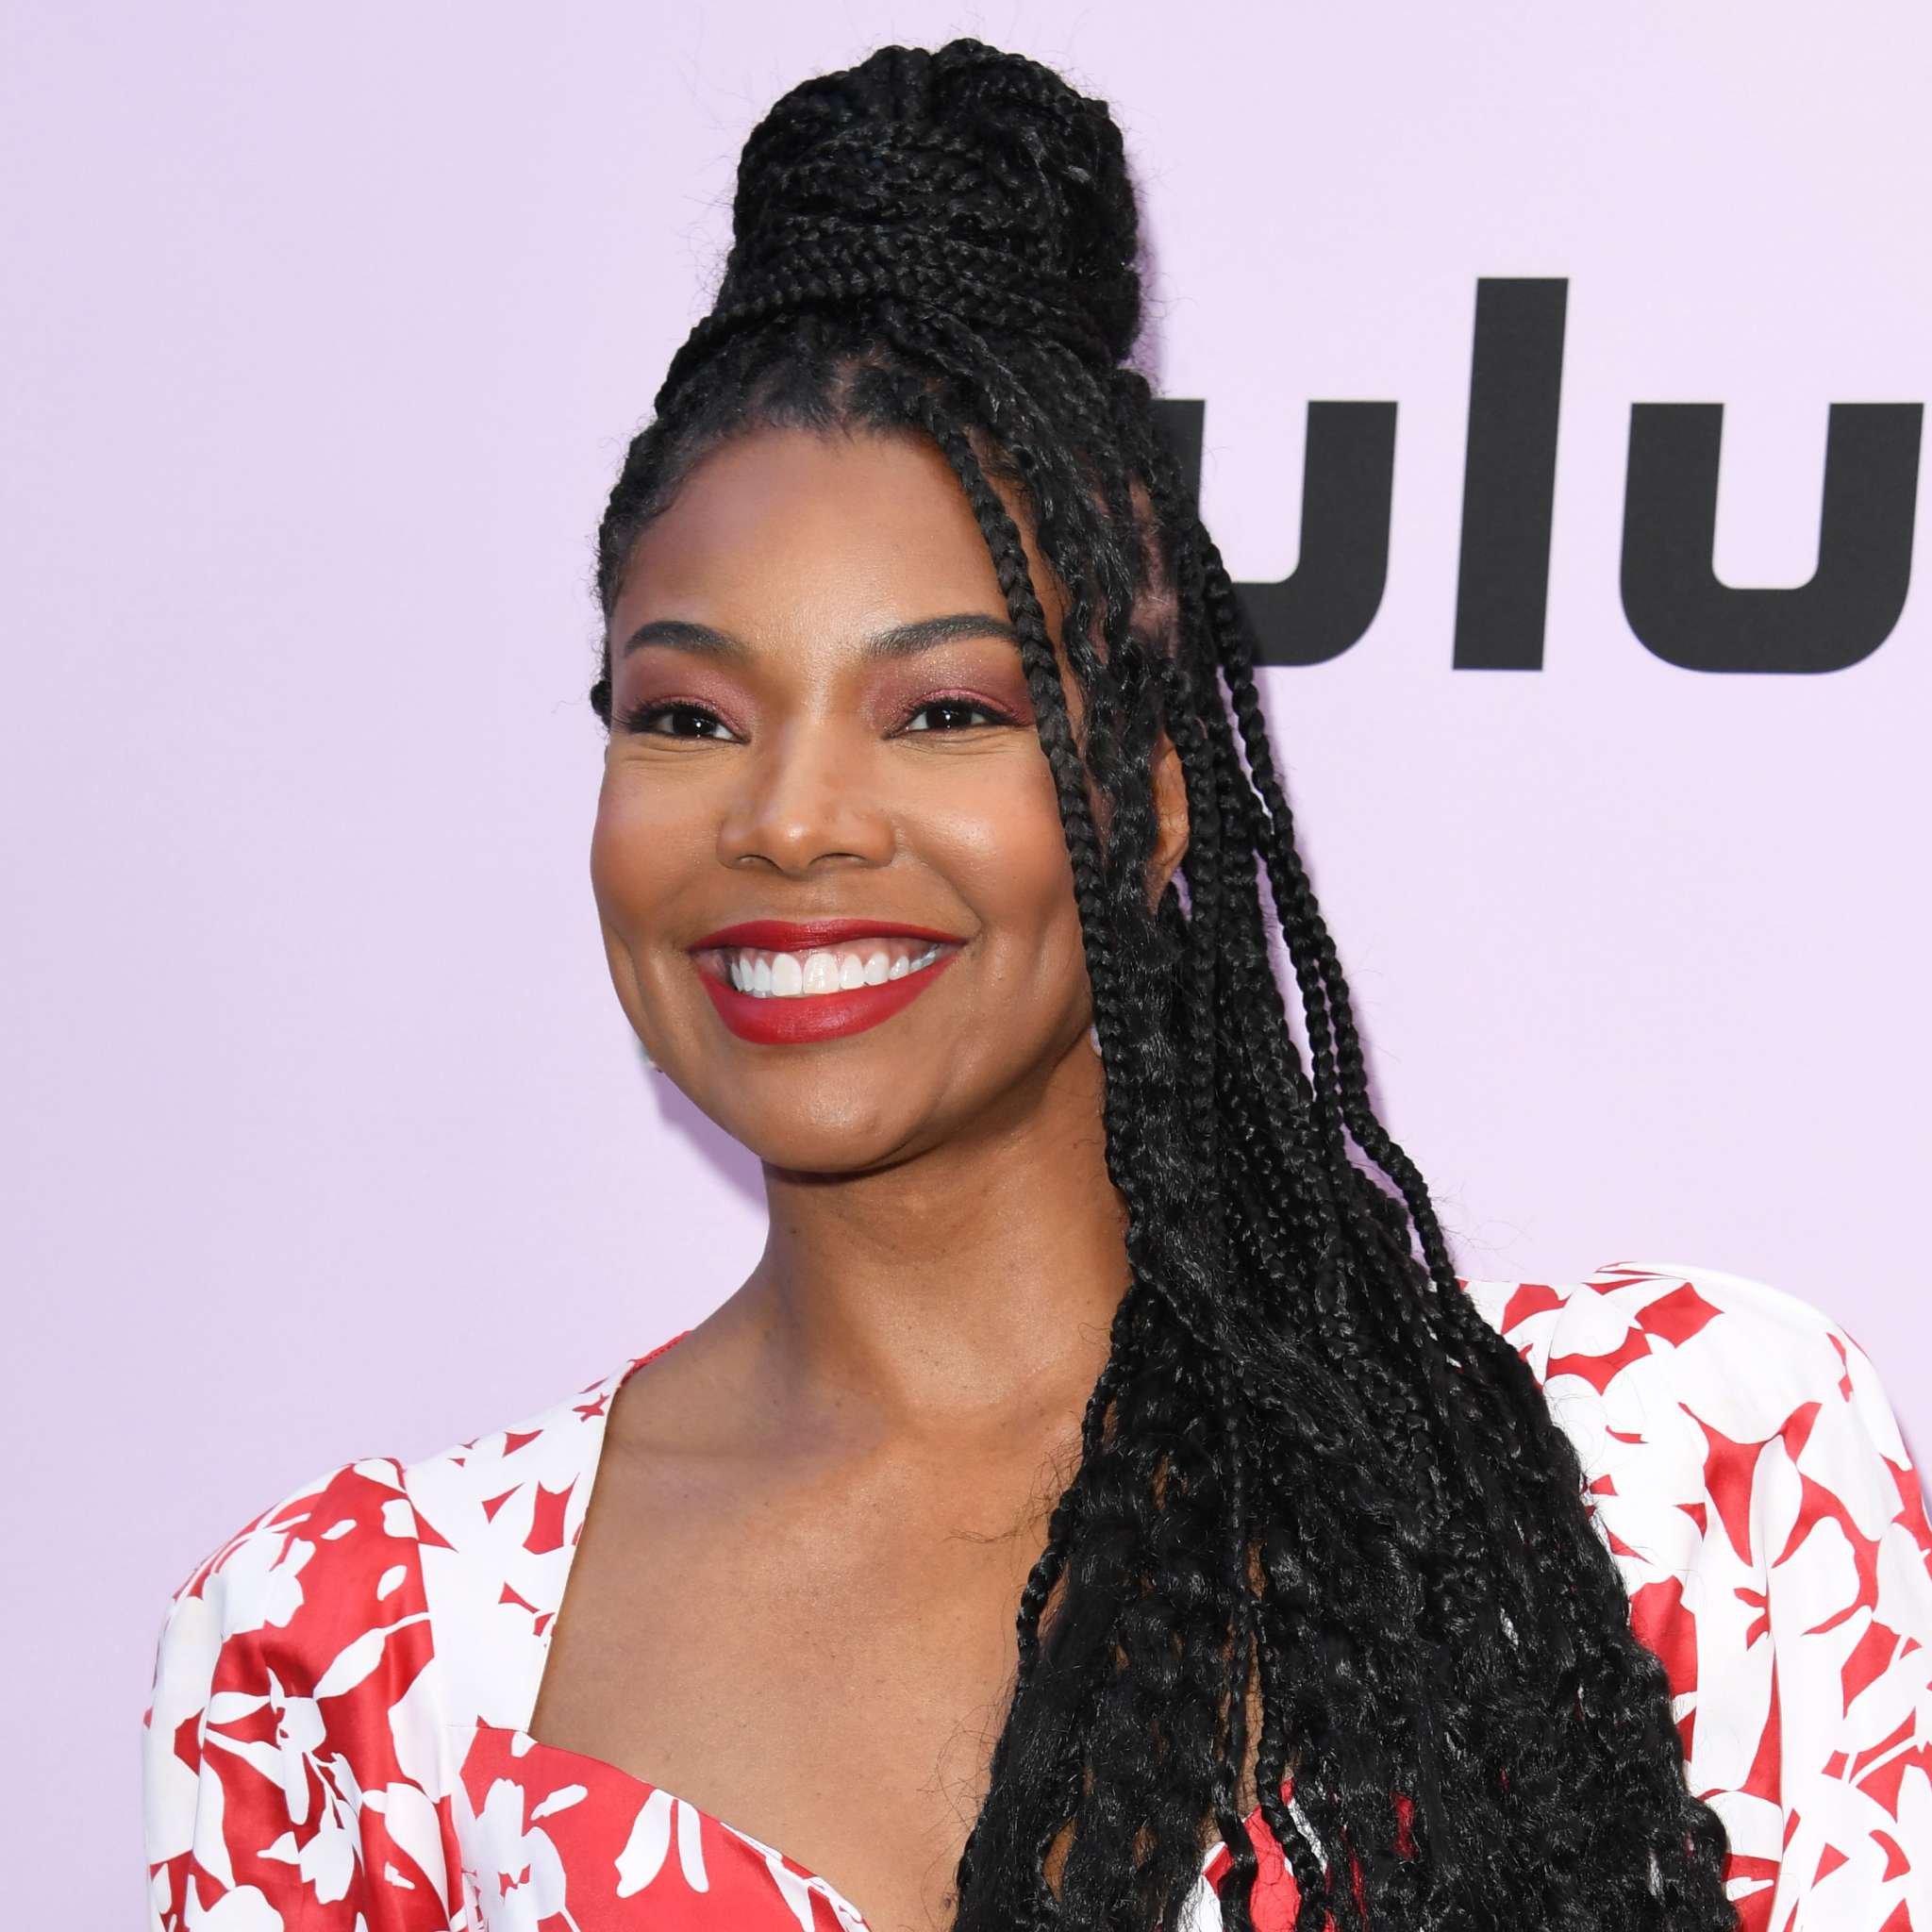 gabrielle-union-is-praising-the-newly-selected-supreme-court-nominee-judge-ketanji-brown-jackson